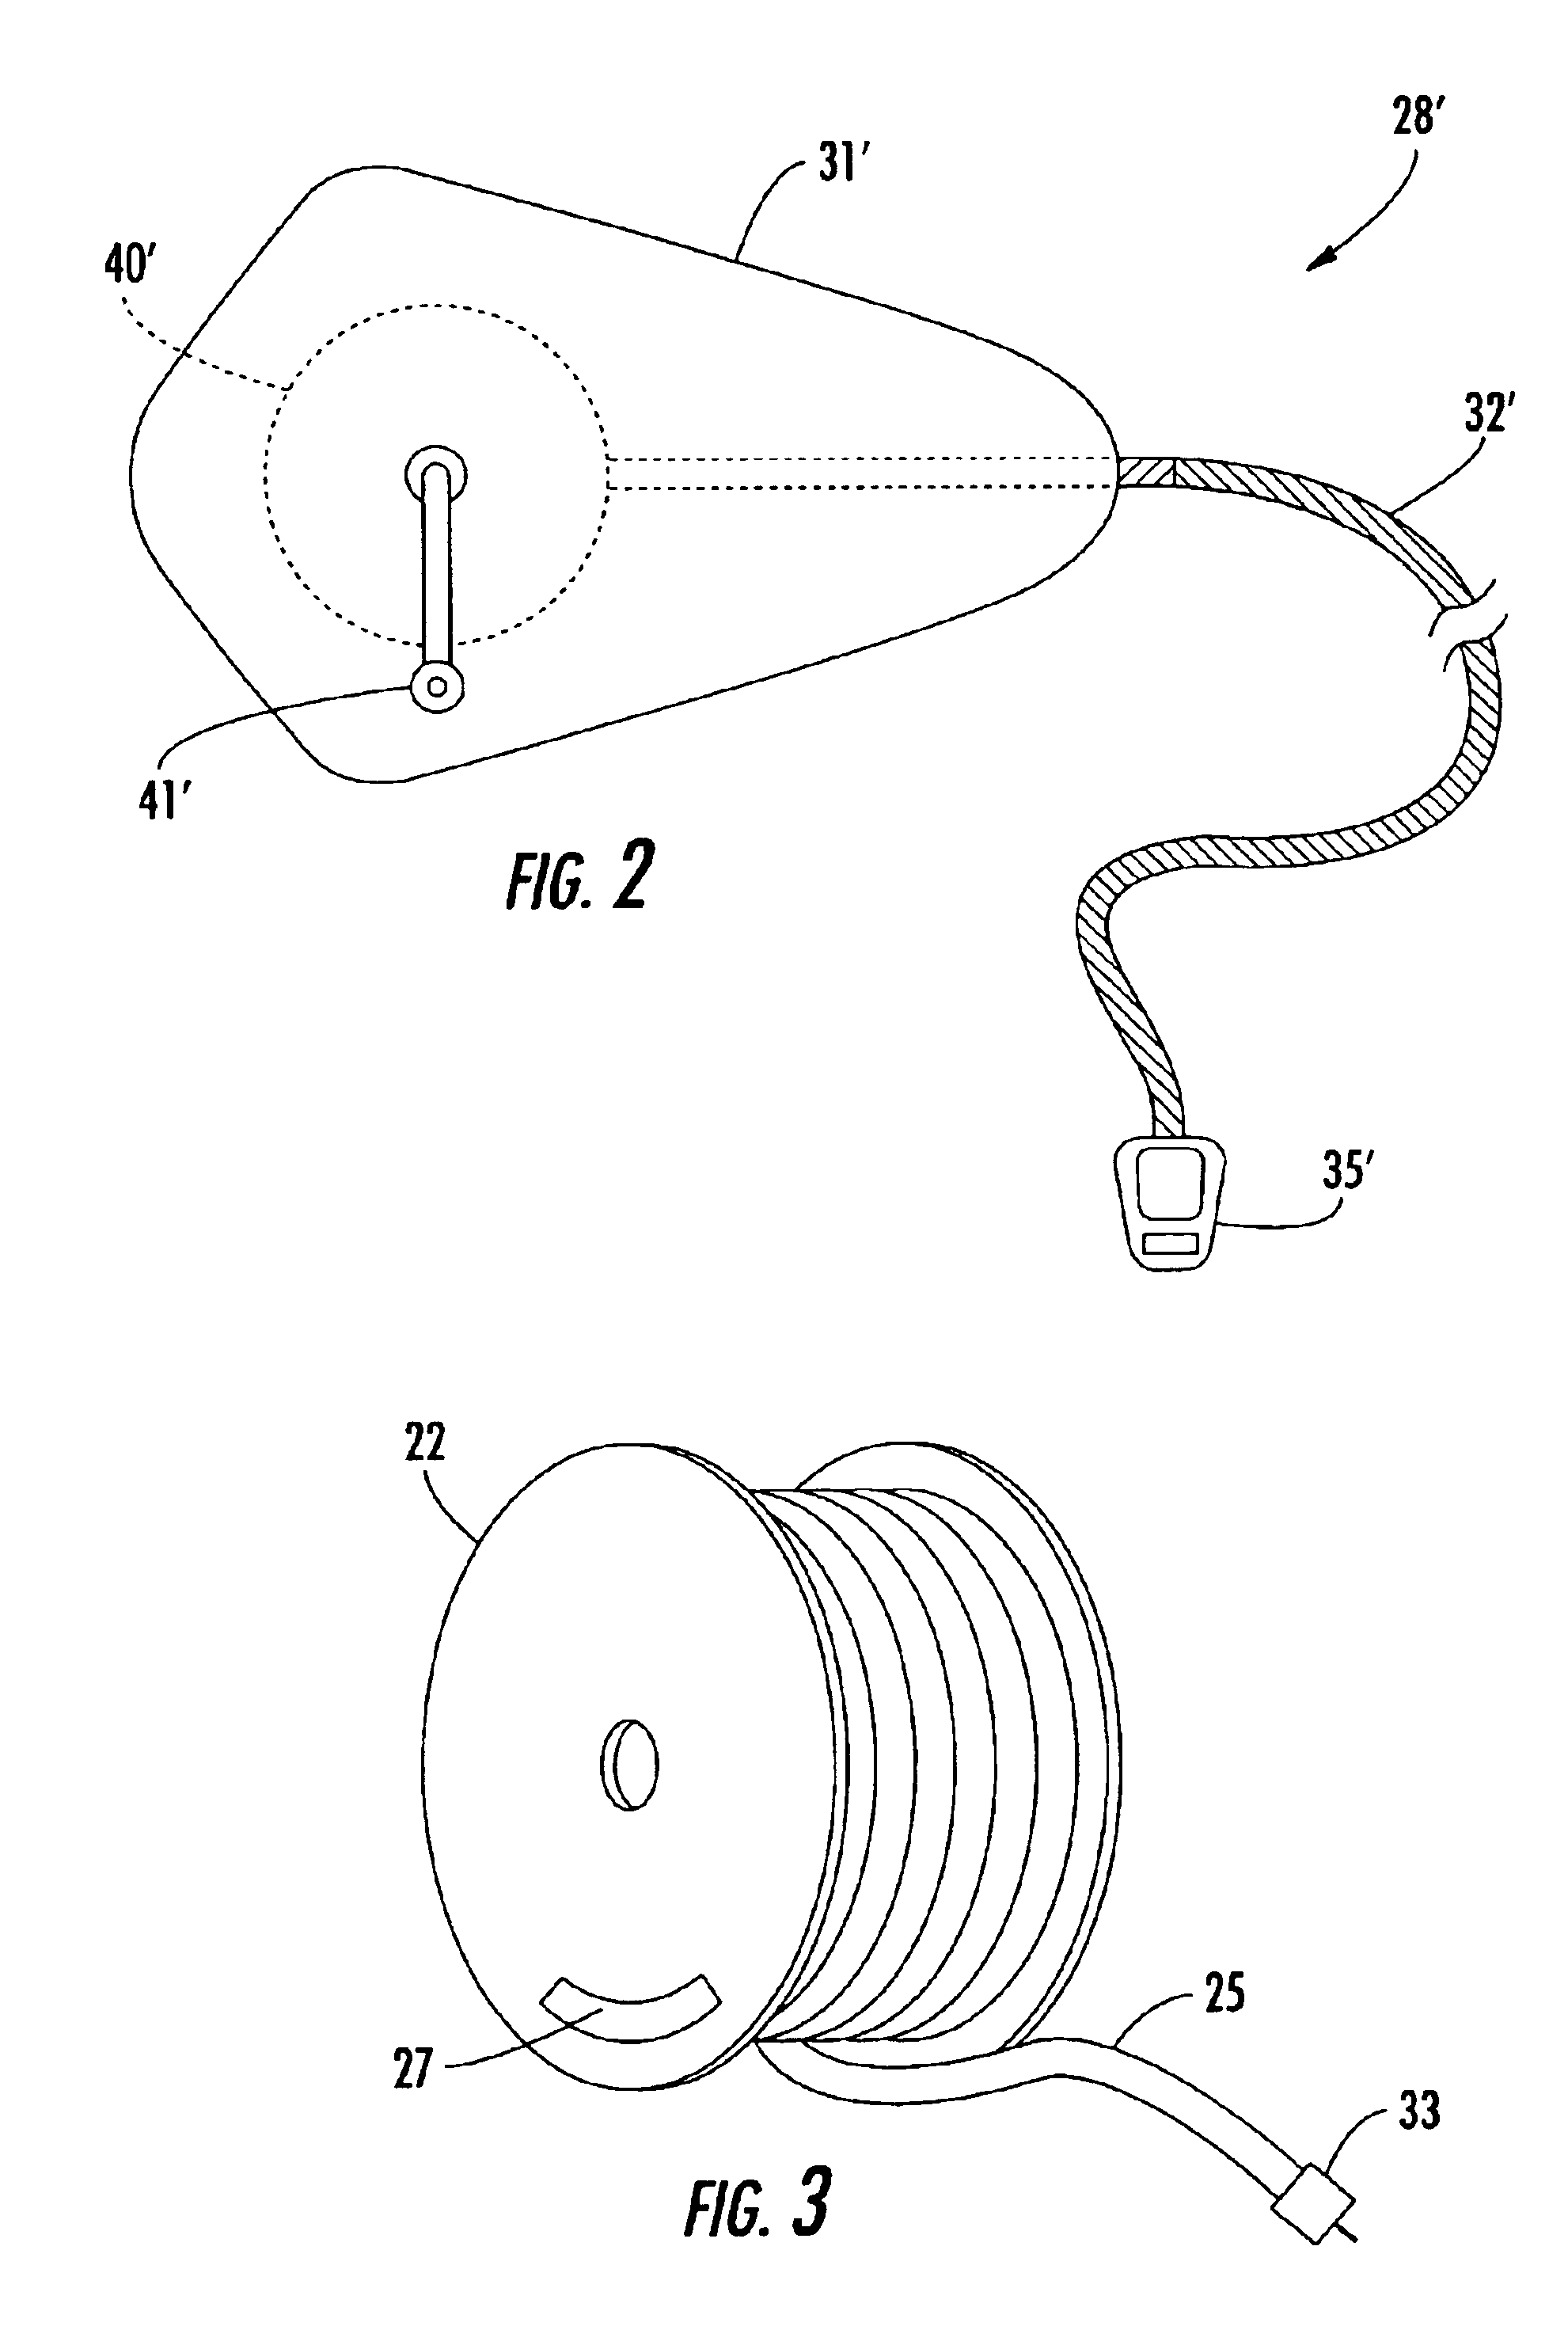 Cable installation system and related methods